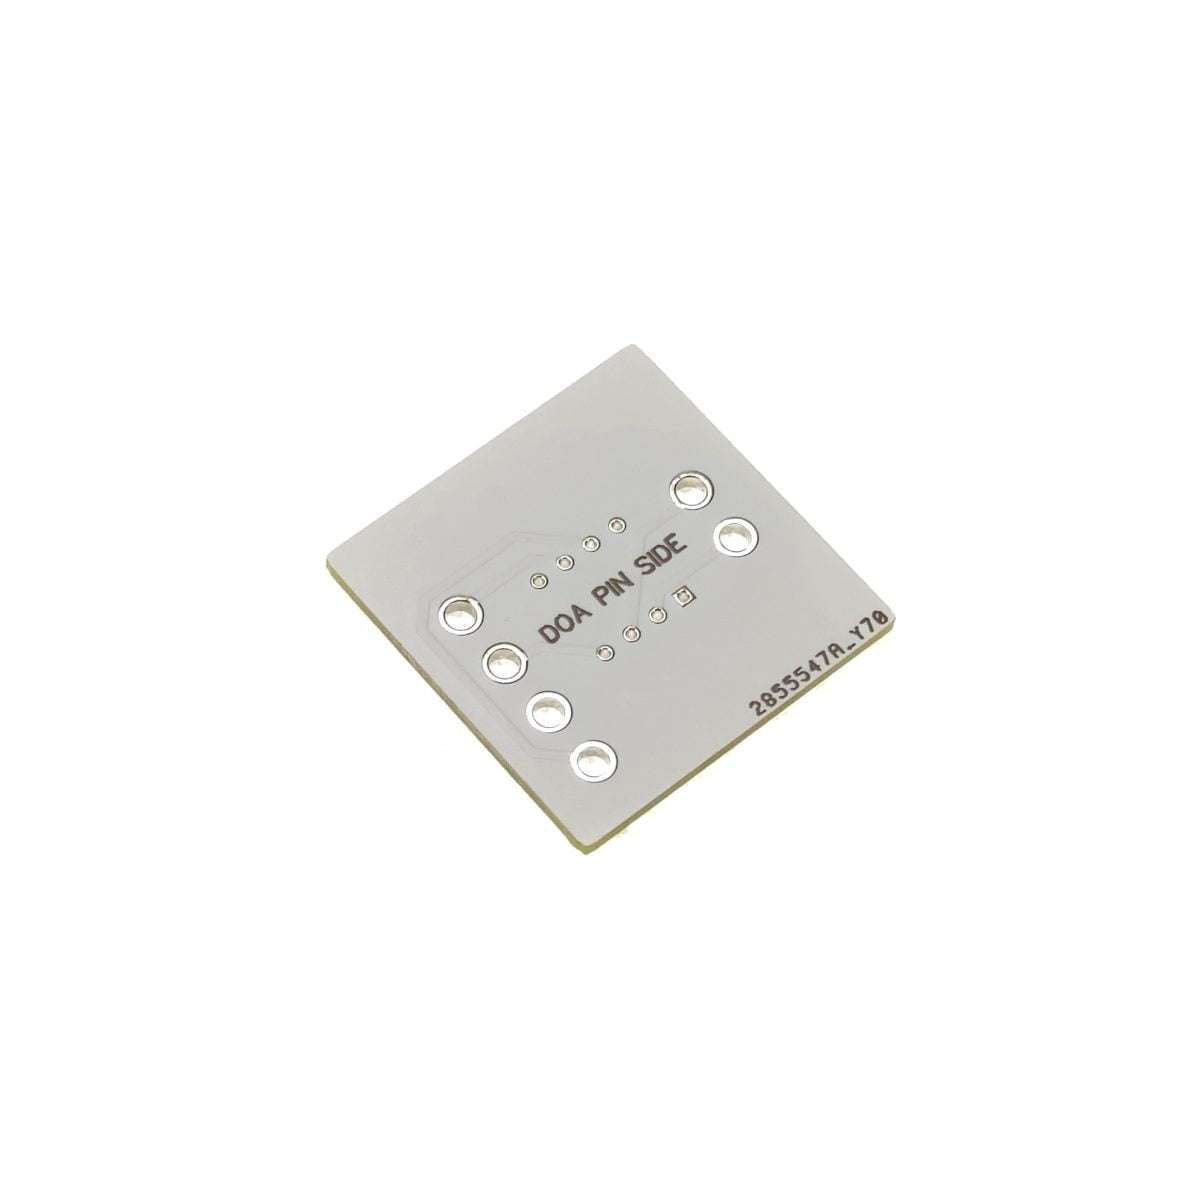 DOA to DIP Adapter on a white background